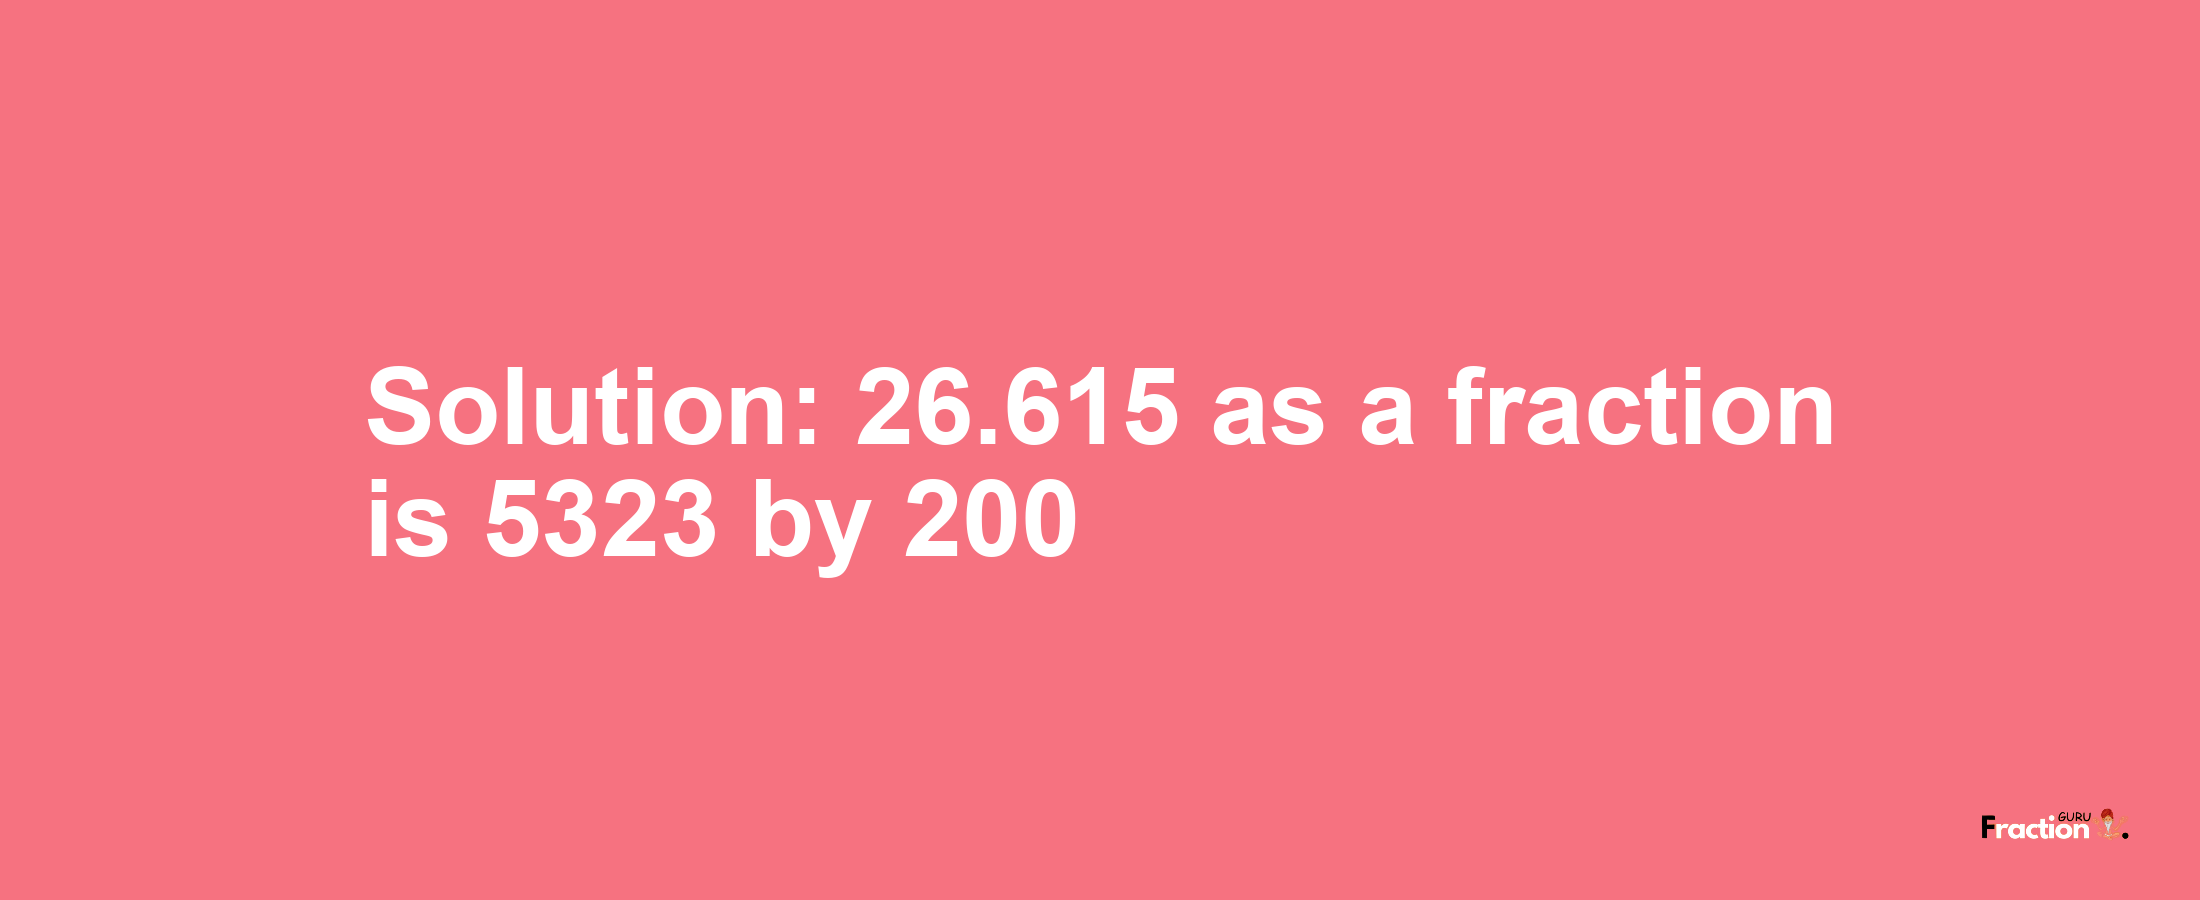 Solution:26.615 as a fraction is 5323/200